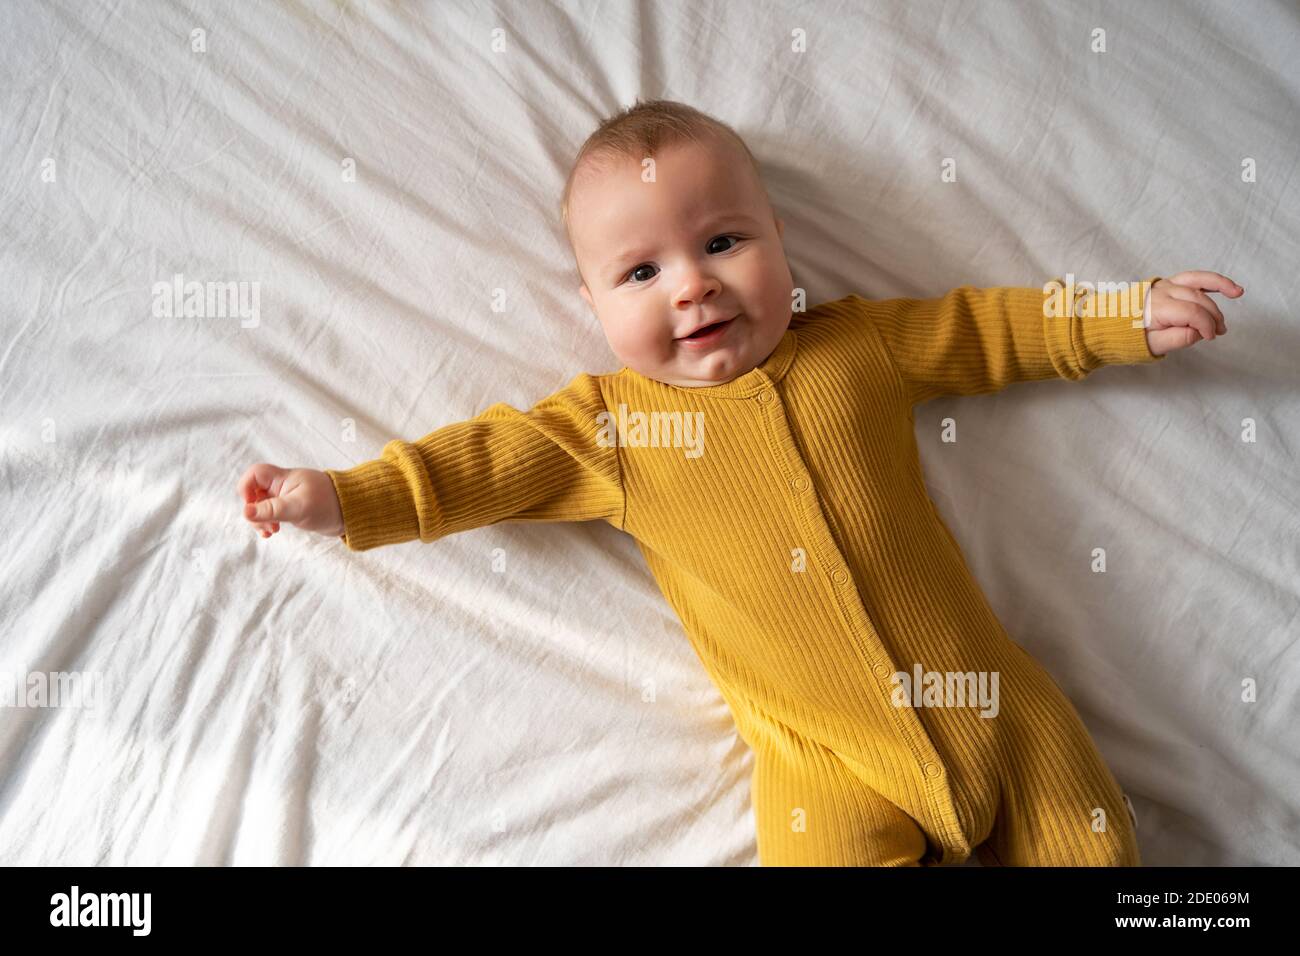 Laughing happy little infant baby boy with open mouth moving hands and legs view from above Stock Photo